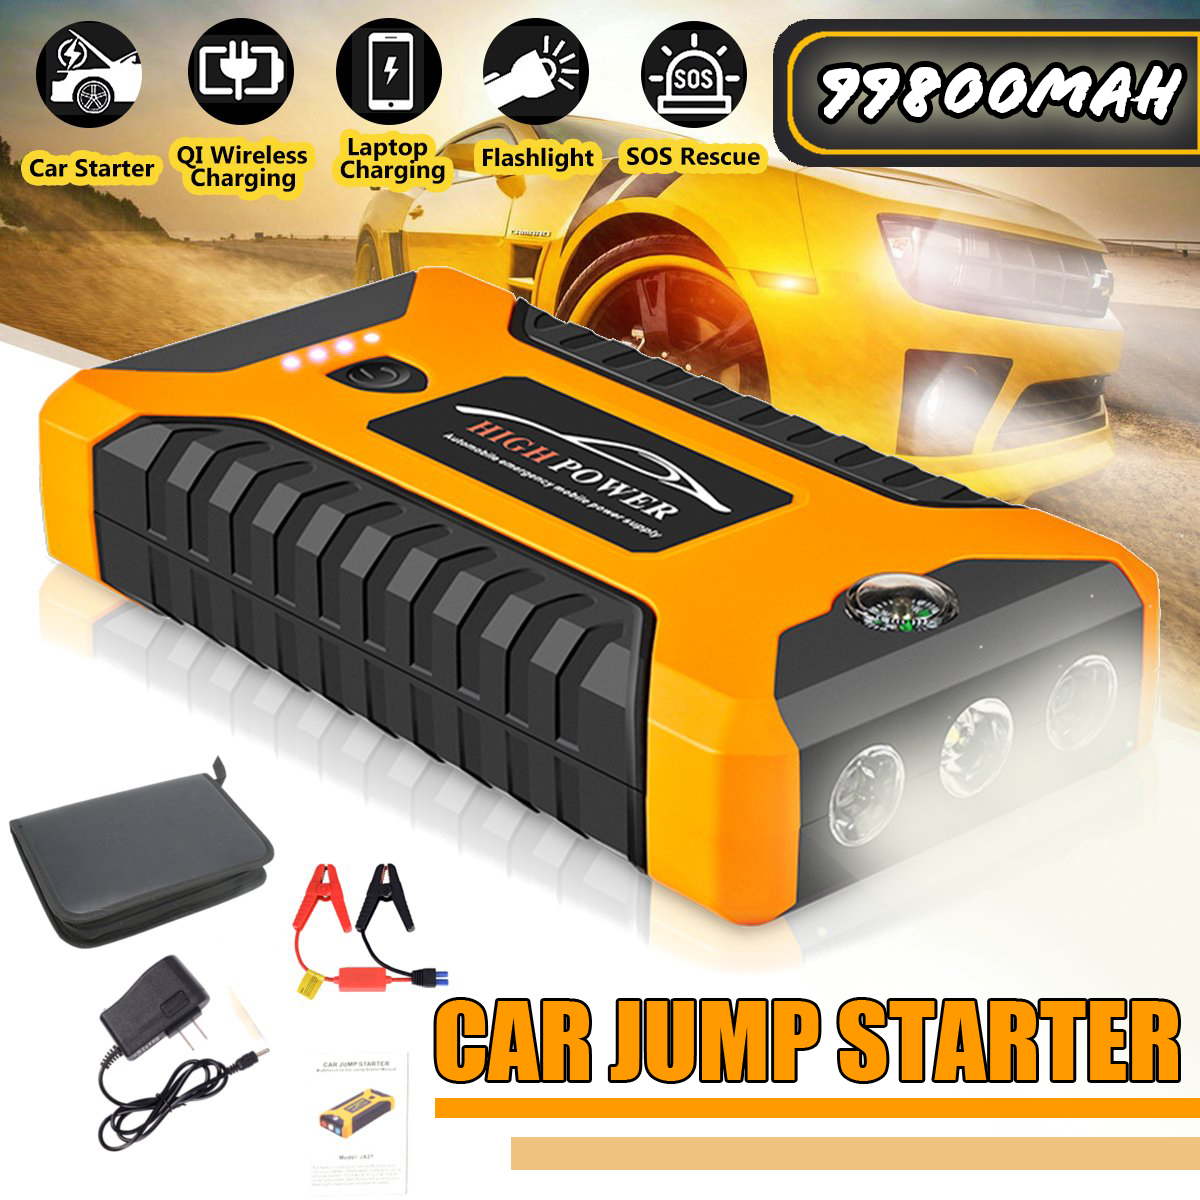 99800mah 600A Peak Car Jump Starter Lithium Battery with LED SOS Mode 12V Auto Battery Booster 11